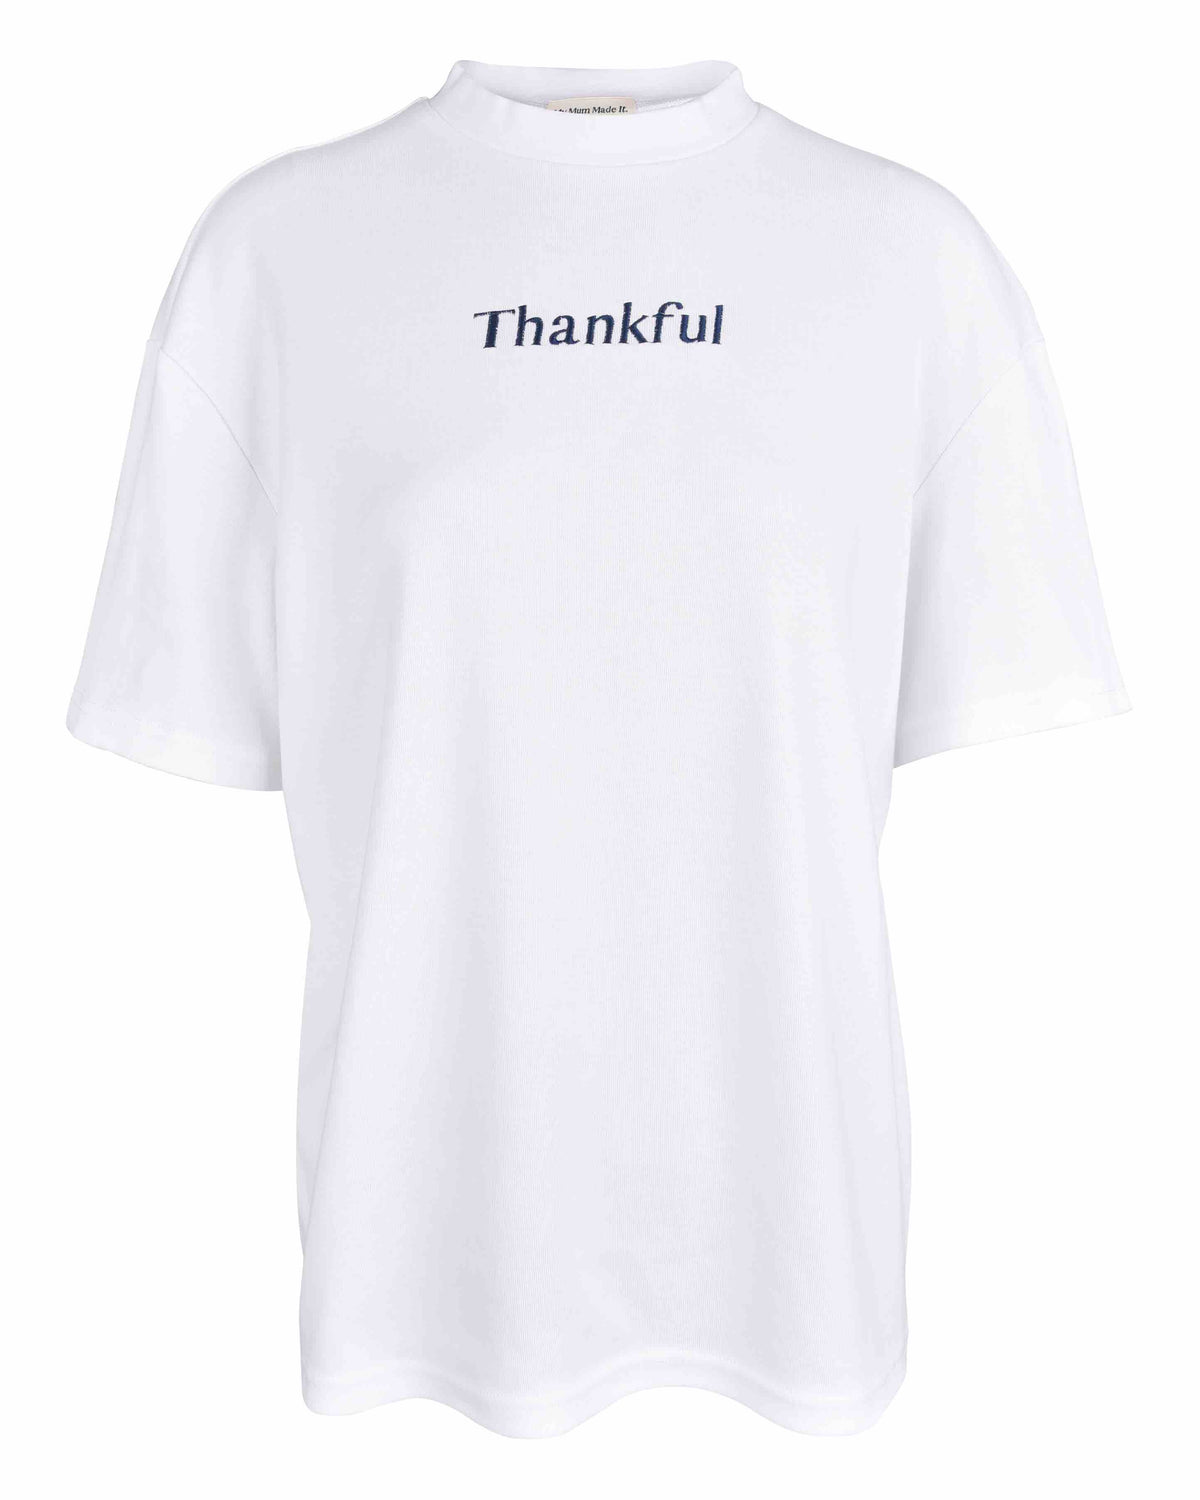 Thankful Embroidery T-Shirt